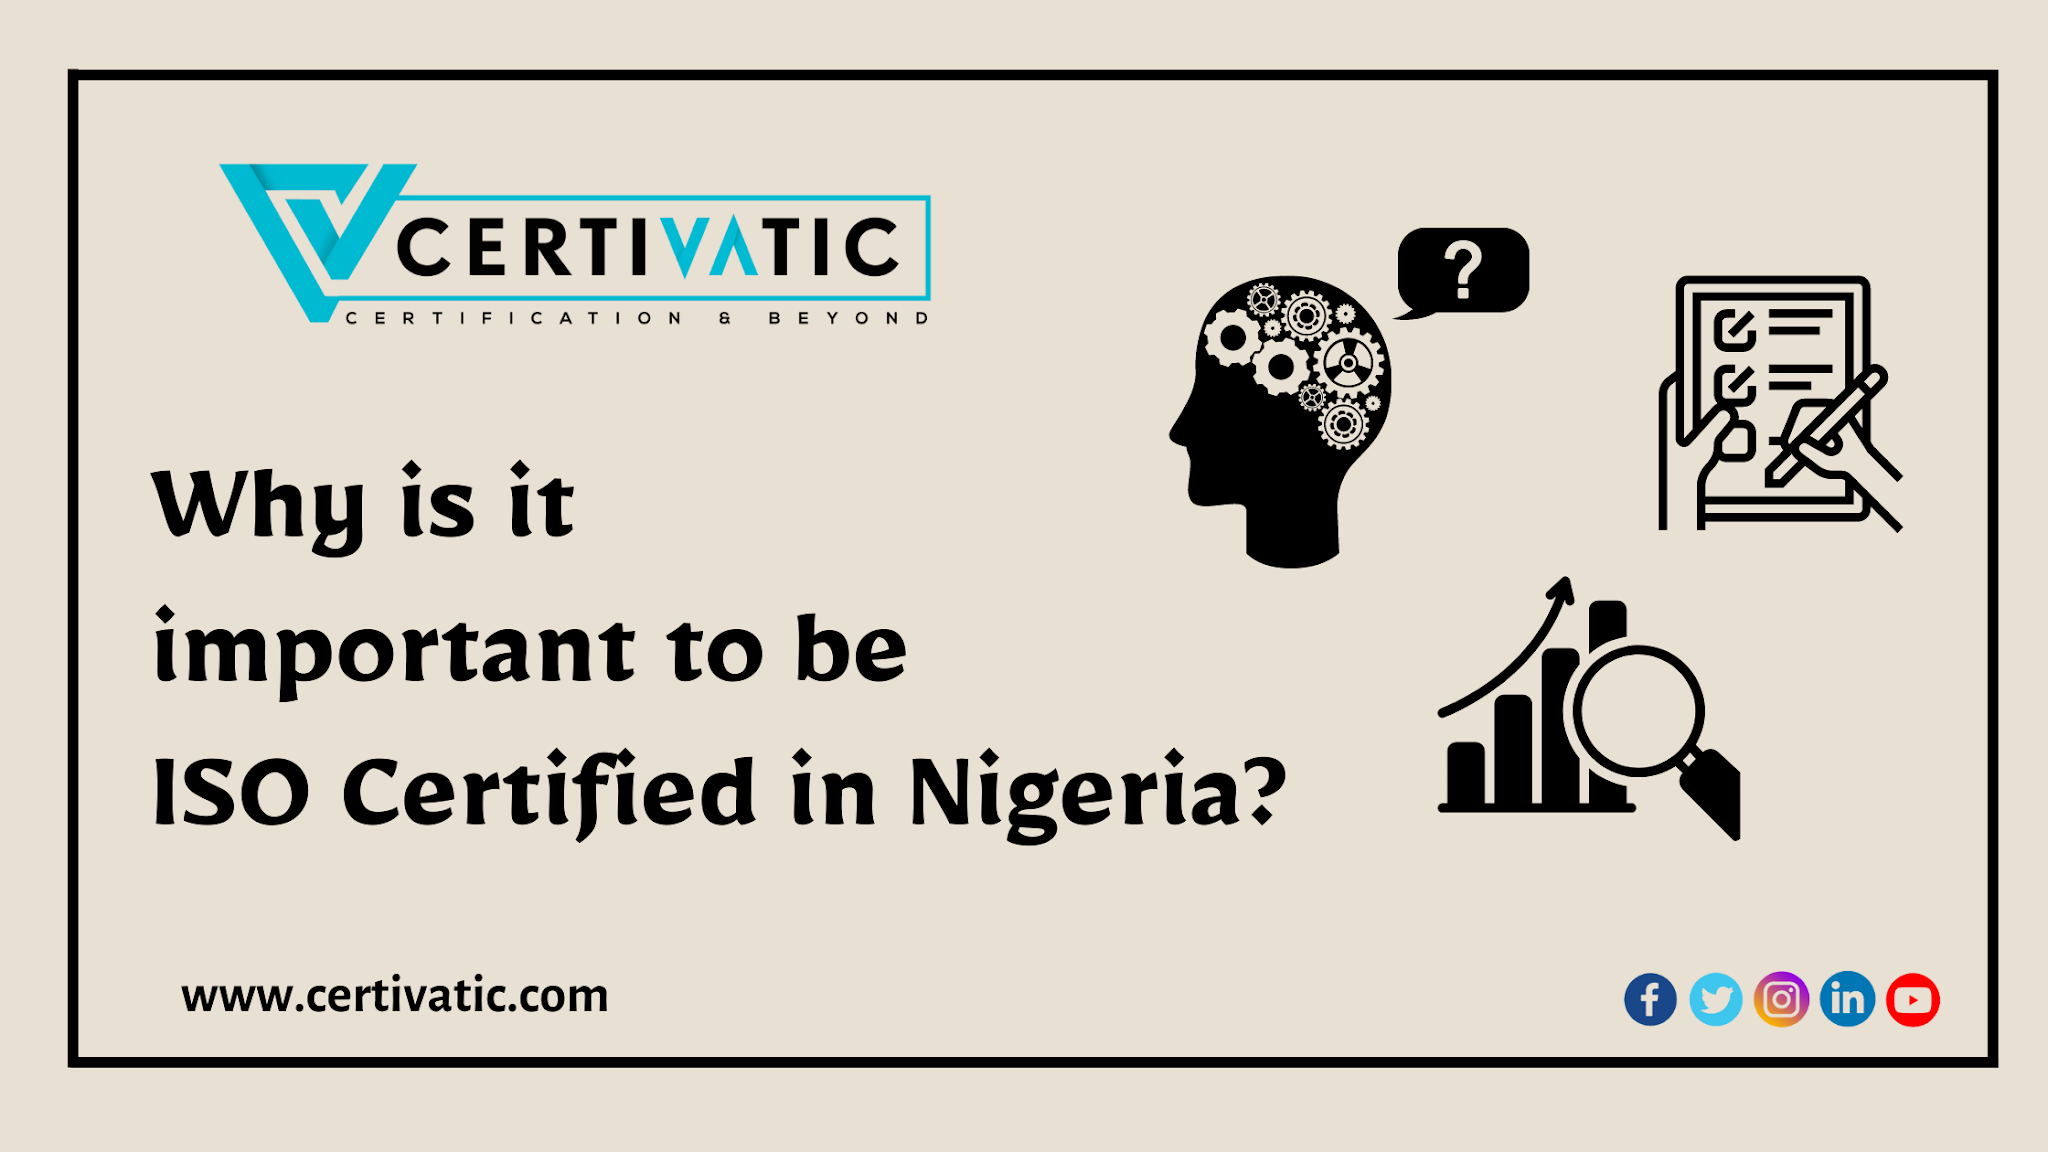 Why is it important to be ISO Certified in Nigeria?